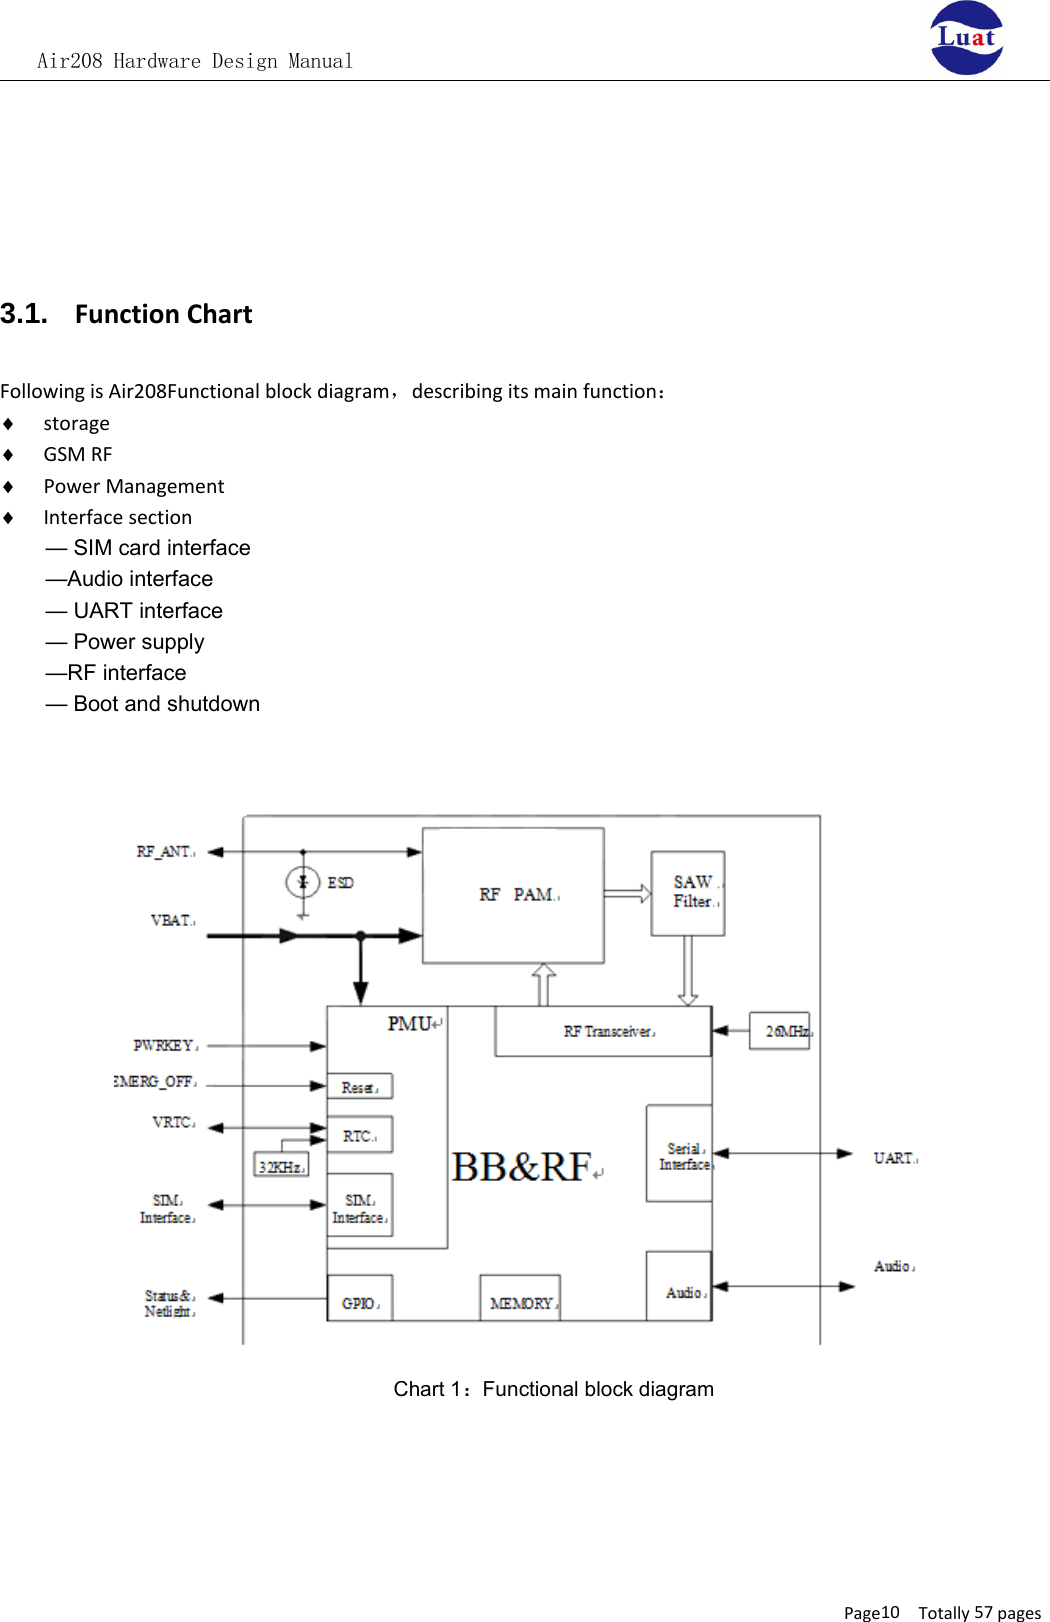 Air208 Hardware Design ManualPage10 Totally 57 pages3.1. Function ChartFollowing is Air208Functional block diagram，describing its main function：♦storage♦GSM RF♦Power Management♦Interface section— SIM card interface—Audio interface— UART interface— Power supply—RF interface— Boot and shutdownChart 1：Functional block diagram